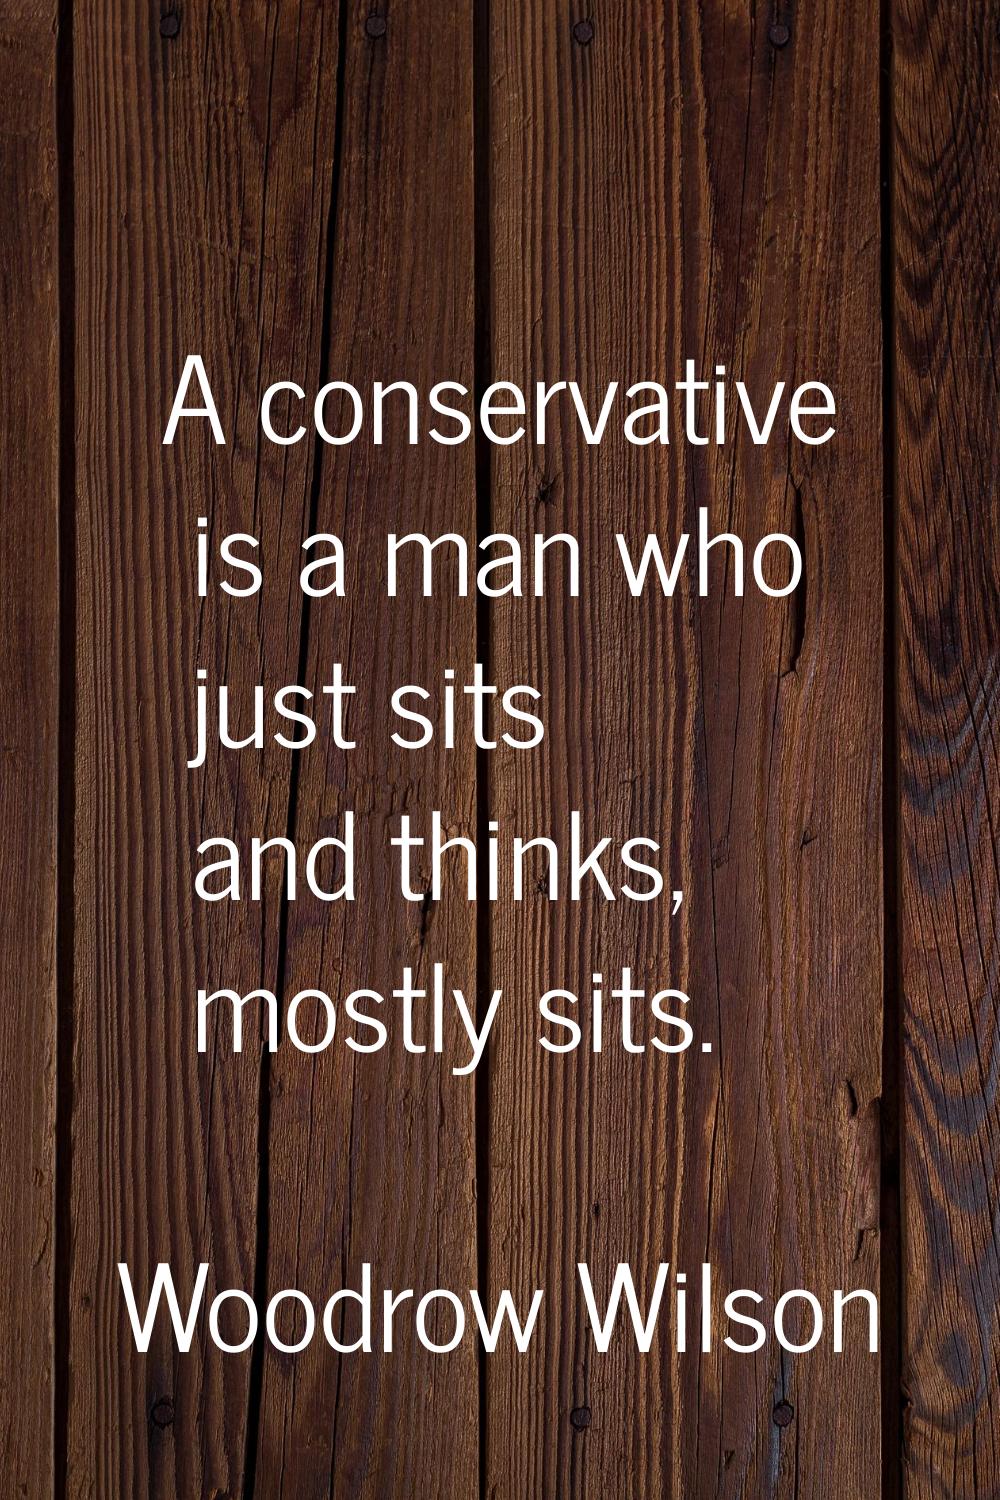 A conservative is a man who just sits and thinks, mostly sits.